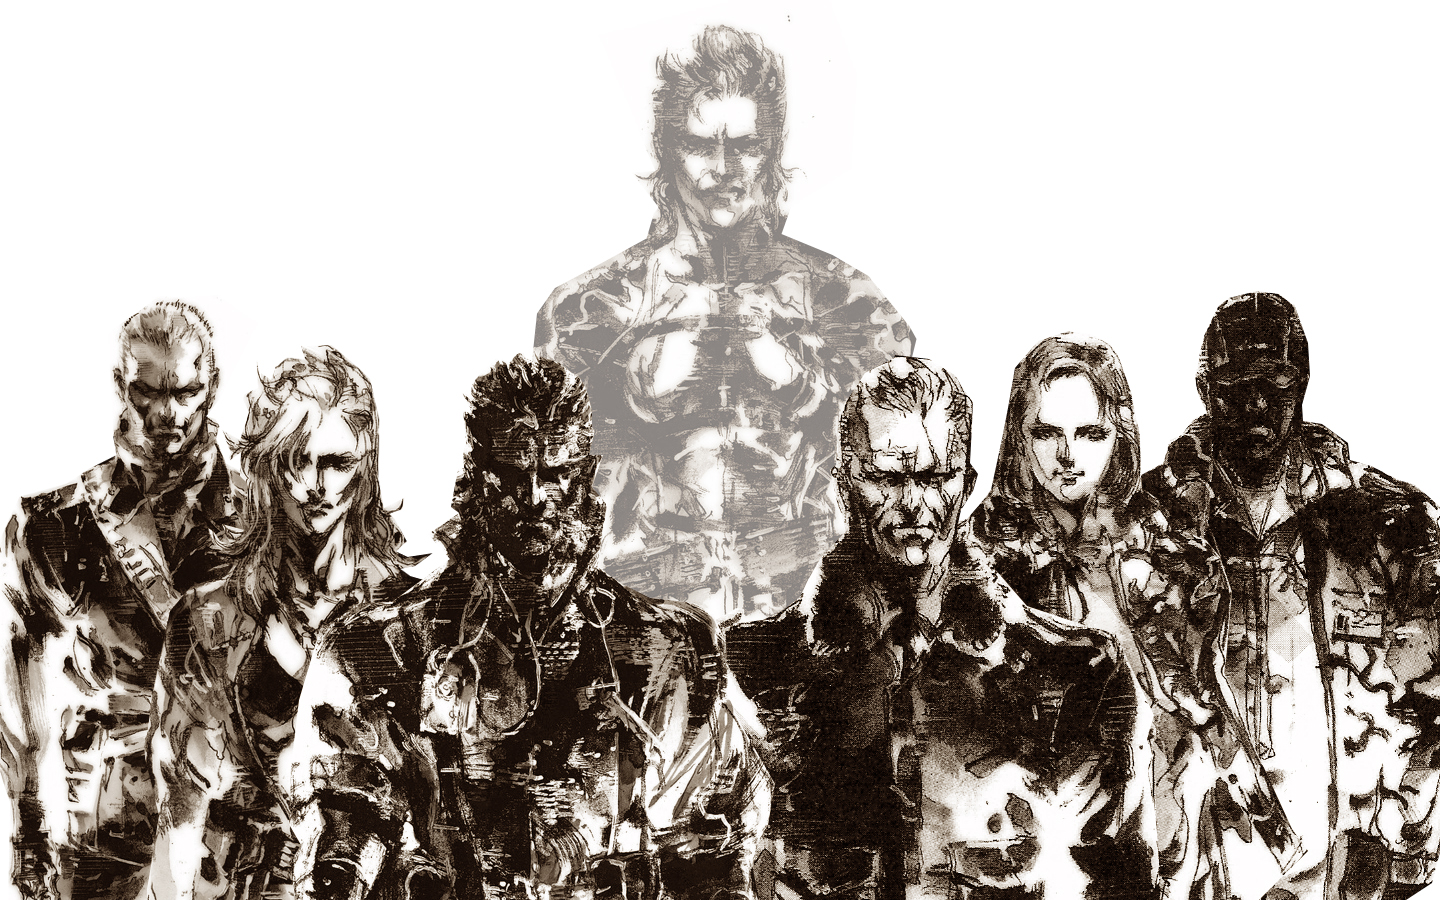 Free Download Metal Gear Solid Cast Wallpaper Background Characters Konami Action 1440x900 For Your Desktop Mobile Tablet Explore 76 Mgs Wallpaper Metal Gear Solid 3 Wallpaper Metal Gear Solid